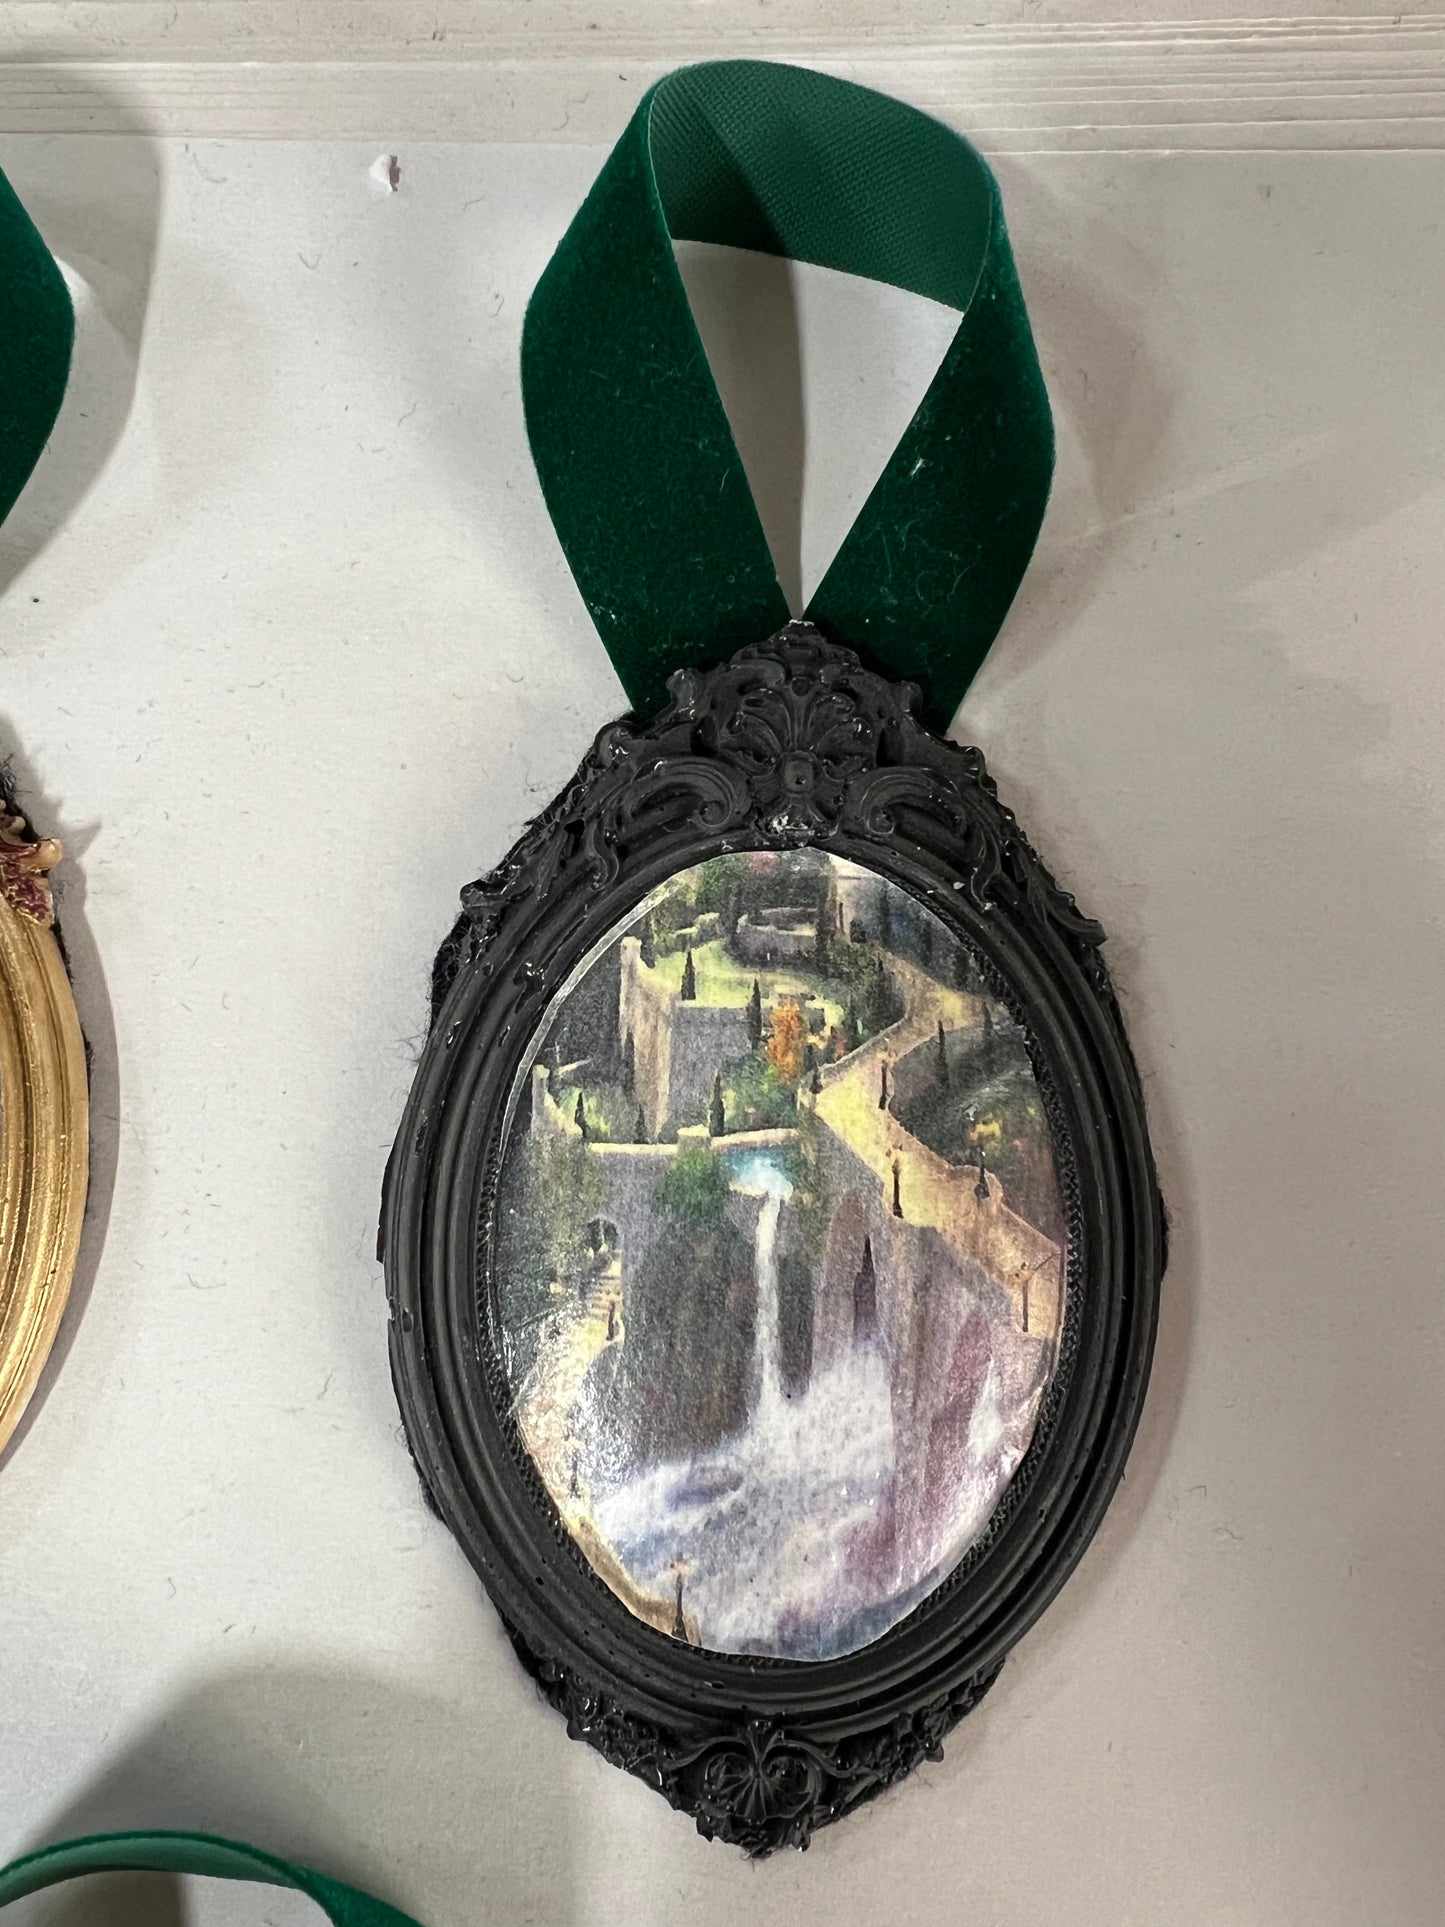 Handcrafted "Beauty and the Beast" inspired Ornaments